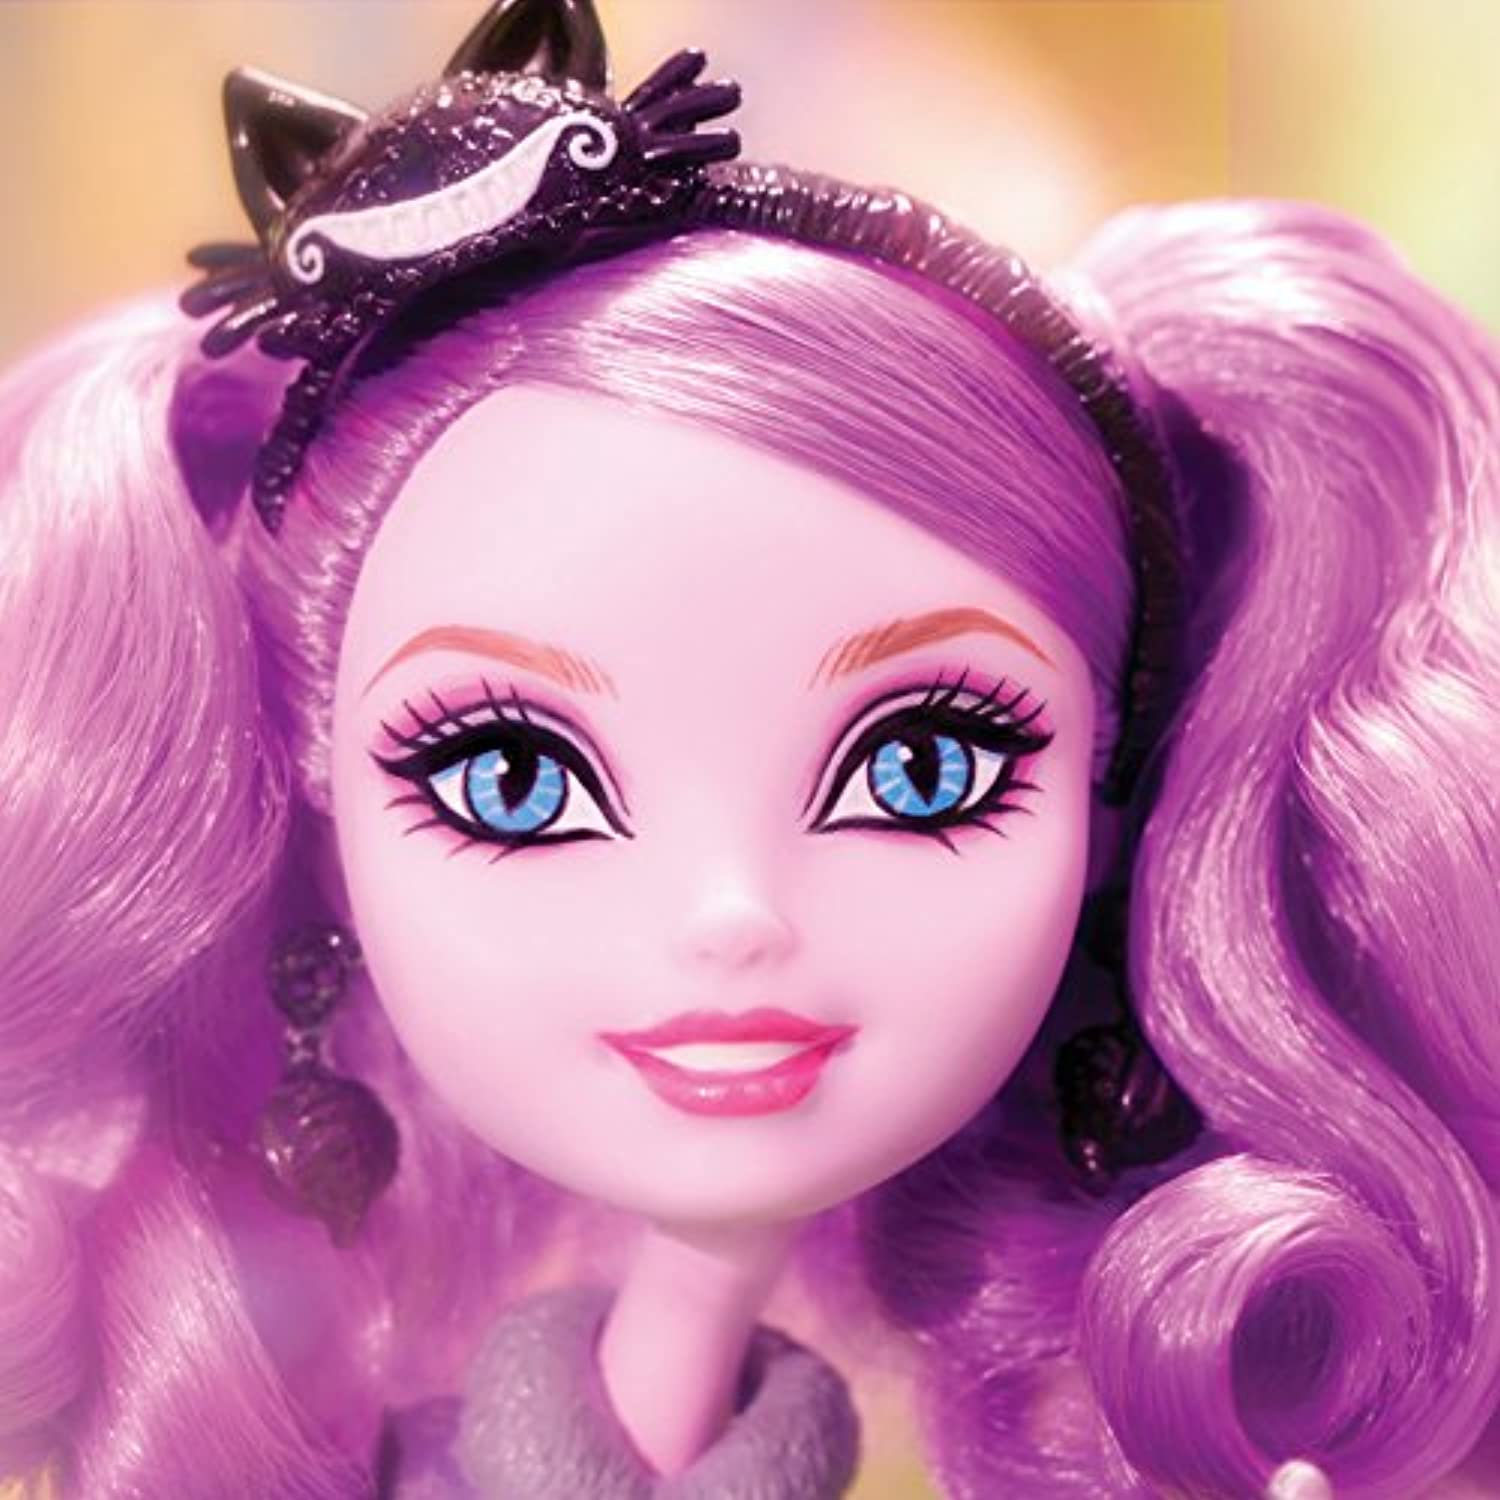 Ever After High 1st Chapter Wave Raven Queen Doll with Clothes